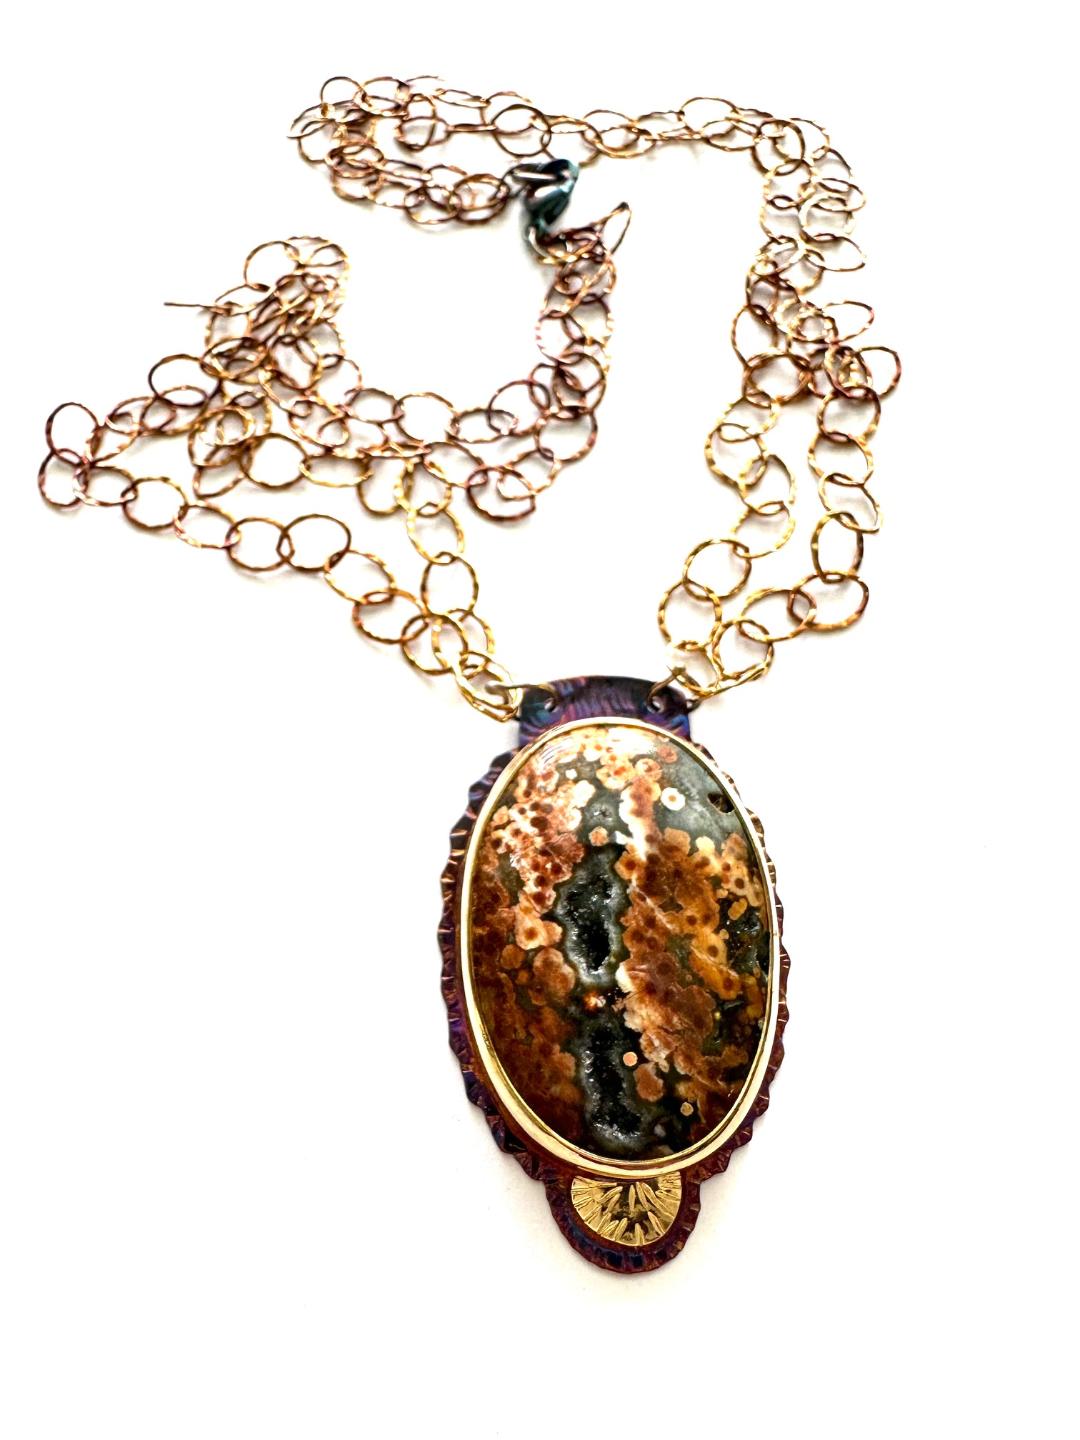 Sterling Silver, Fine Silver Bezel, 18k Gold, and Orbicular Jasper with Quartz Crystals Popping Through Necklace with Sterling Silver Chain and Lobster Clasp